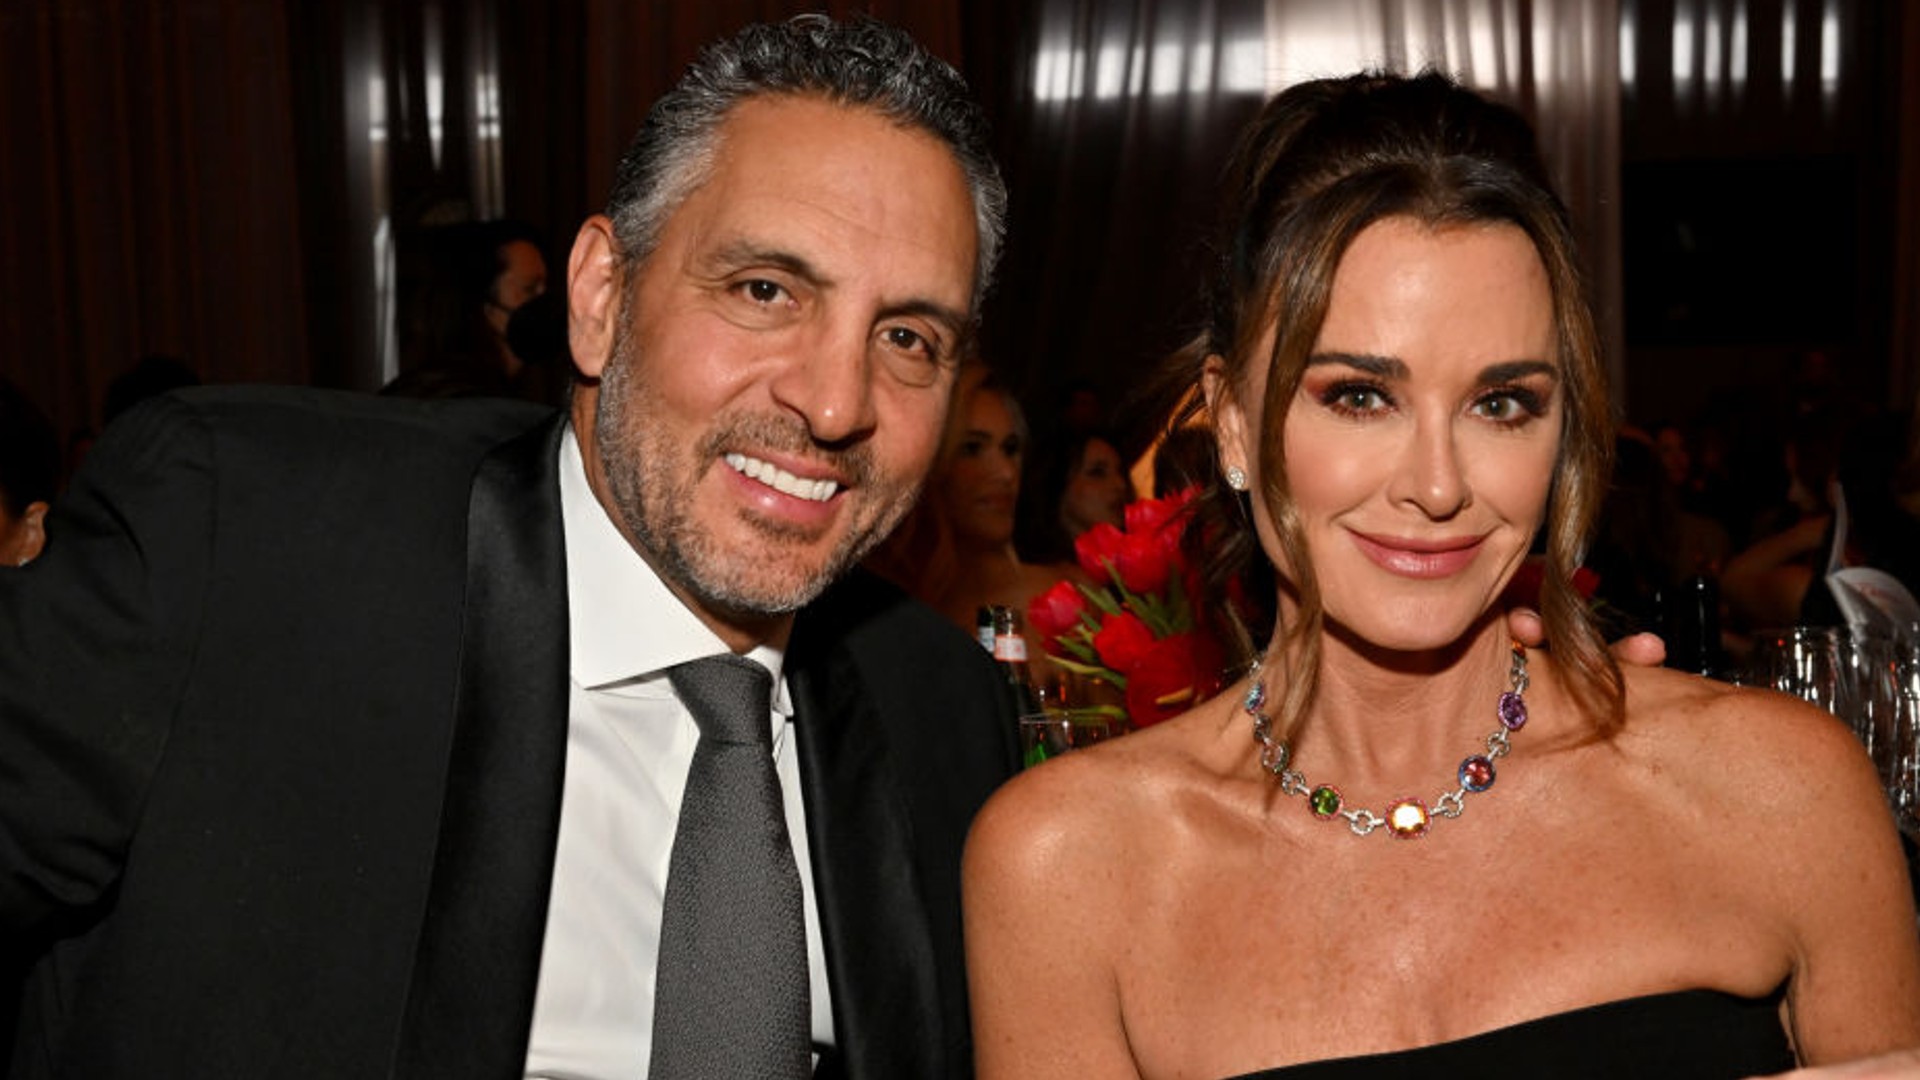 Kyle Richards Joins Mauricio Umansky In Aspen After His Shirtless Partying With Anitta